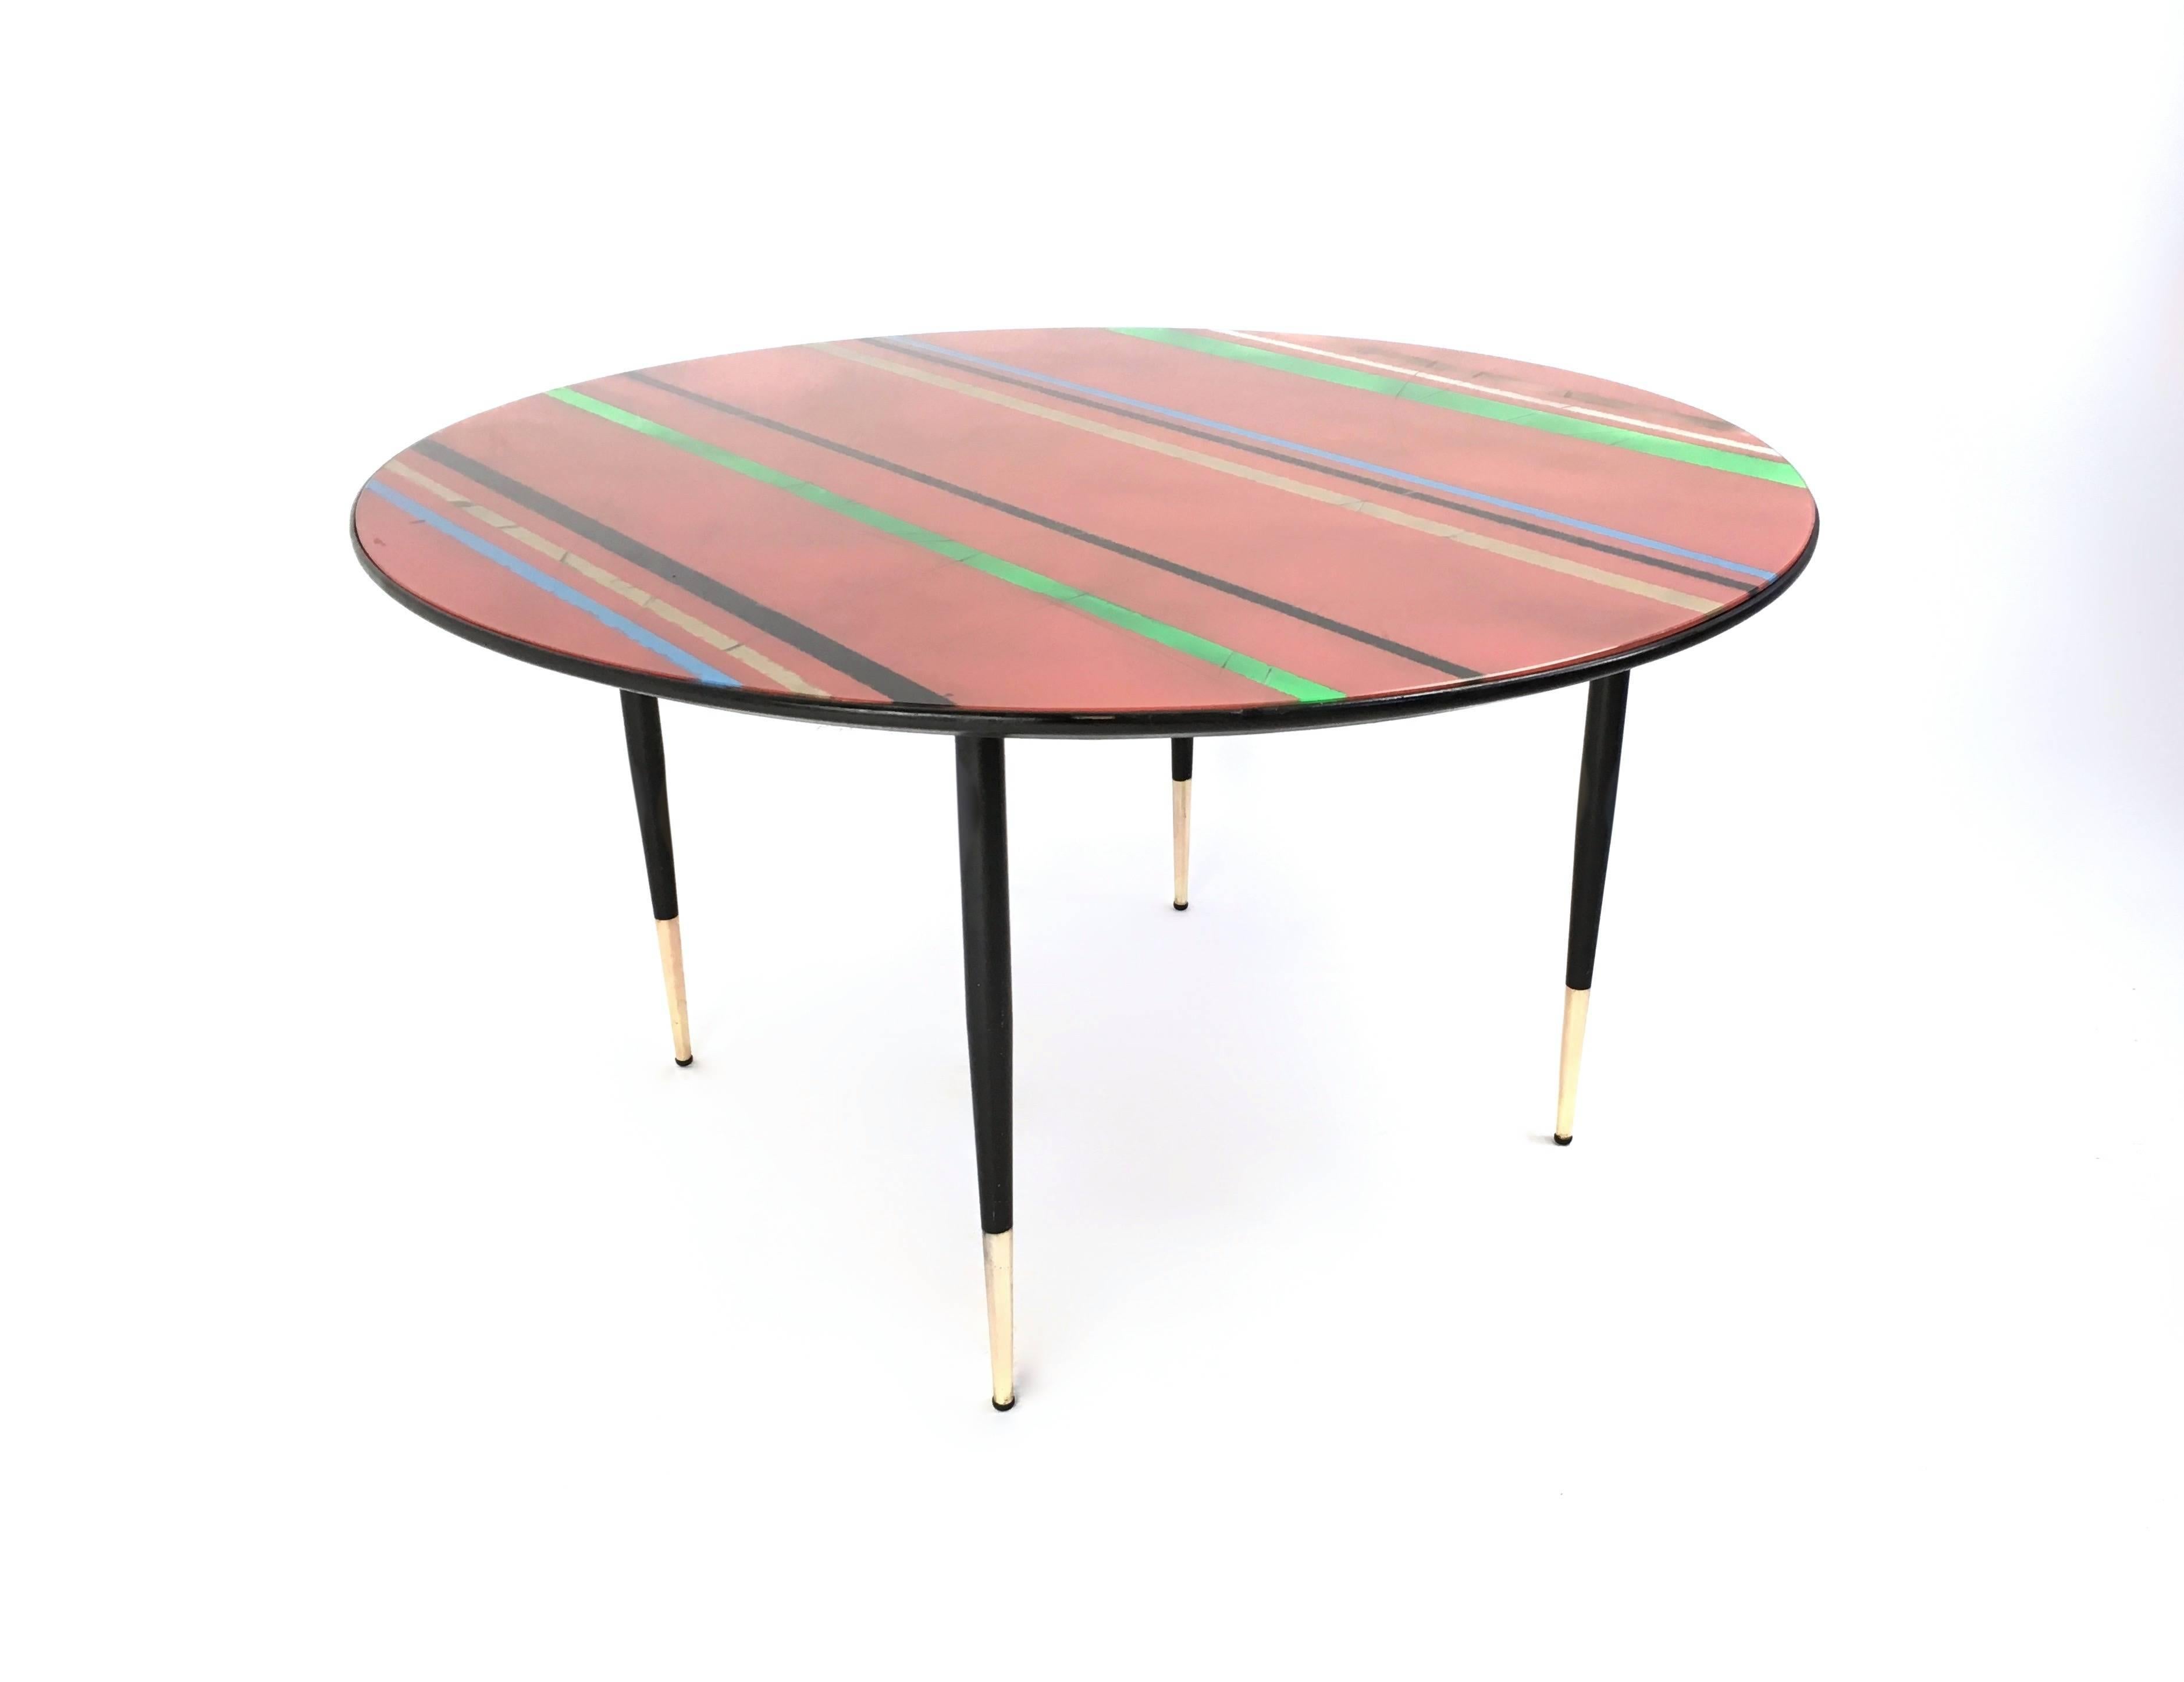 Made in Italy, 1950s. 
This coffee table features a wooden frame with iron legs and brass feet caps, and a back-painted glass top.
It is a vintage item, therefore it might show slight traces of use, but it can be considered as in very good original